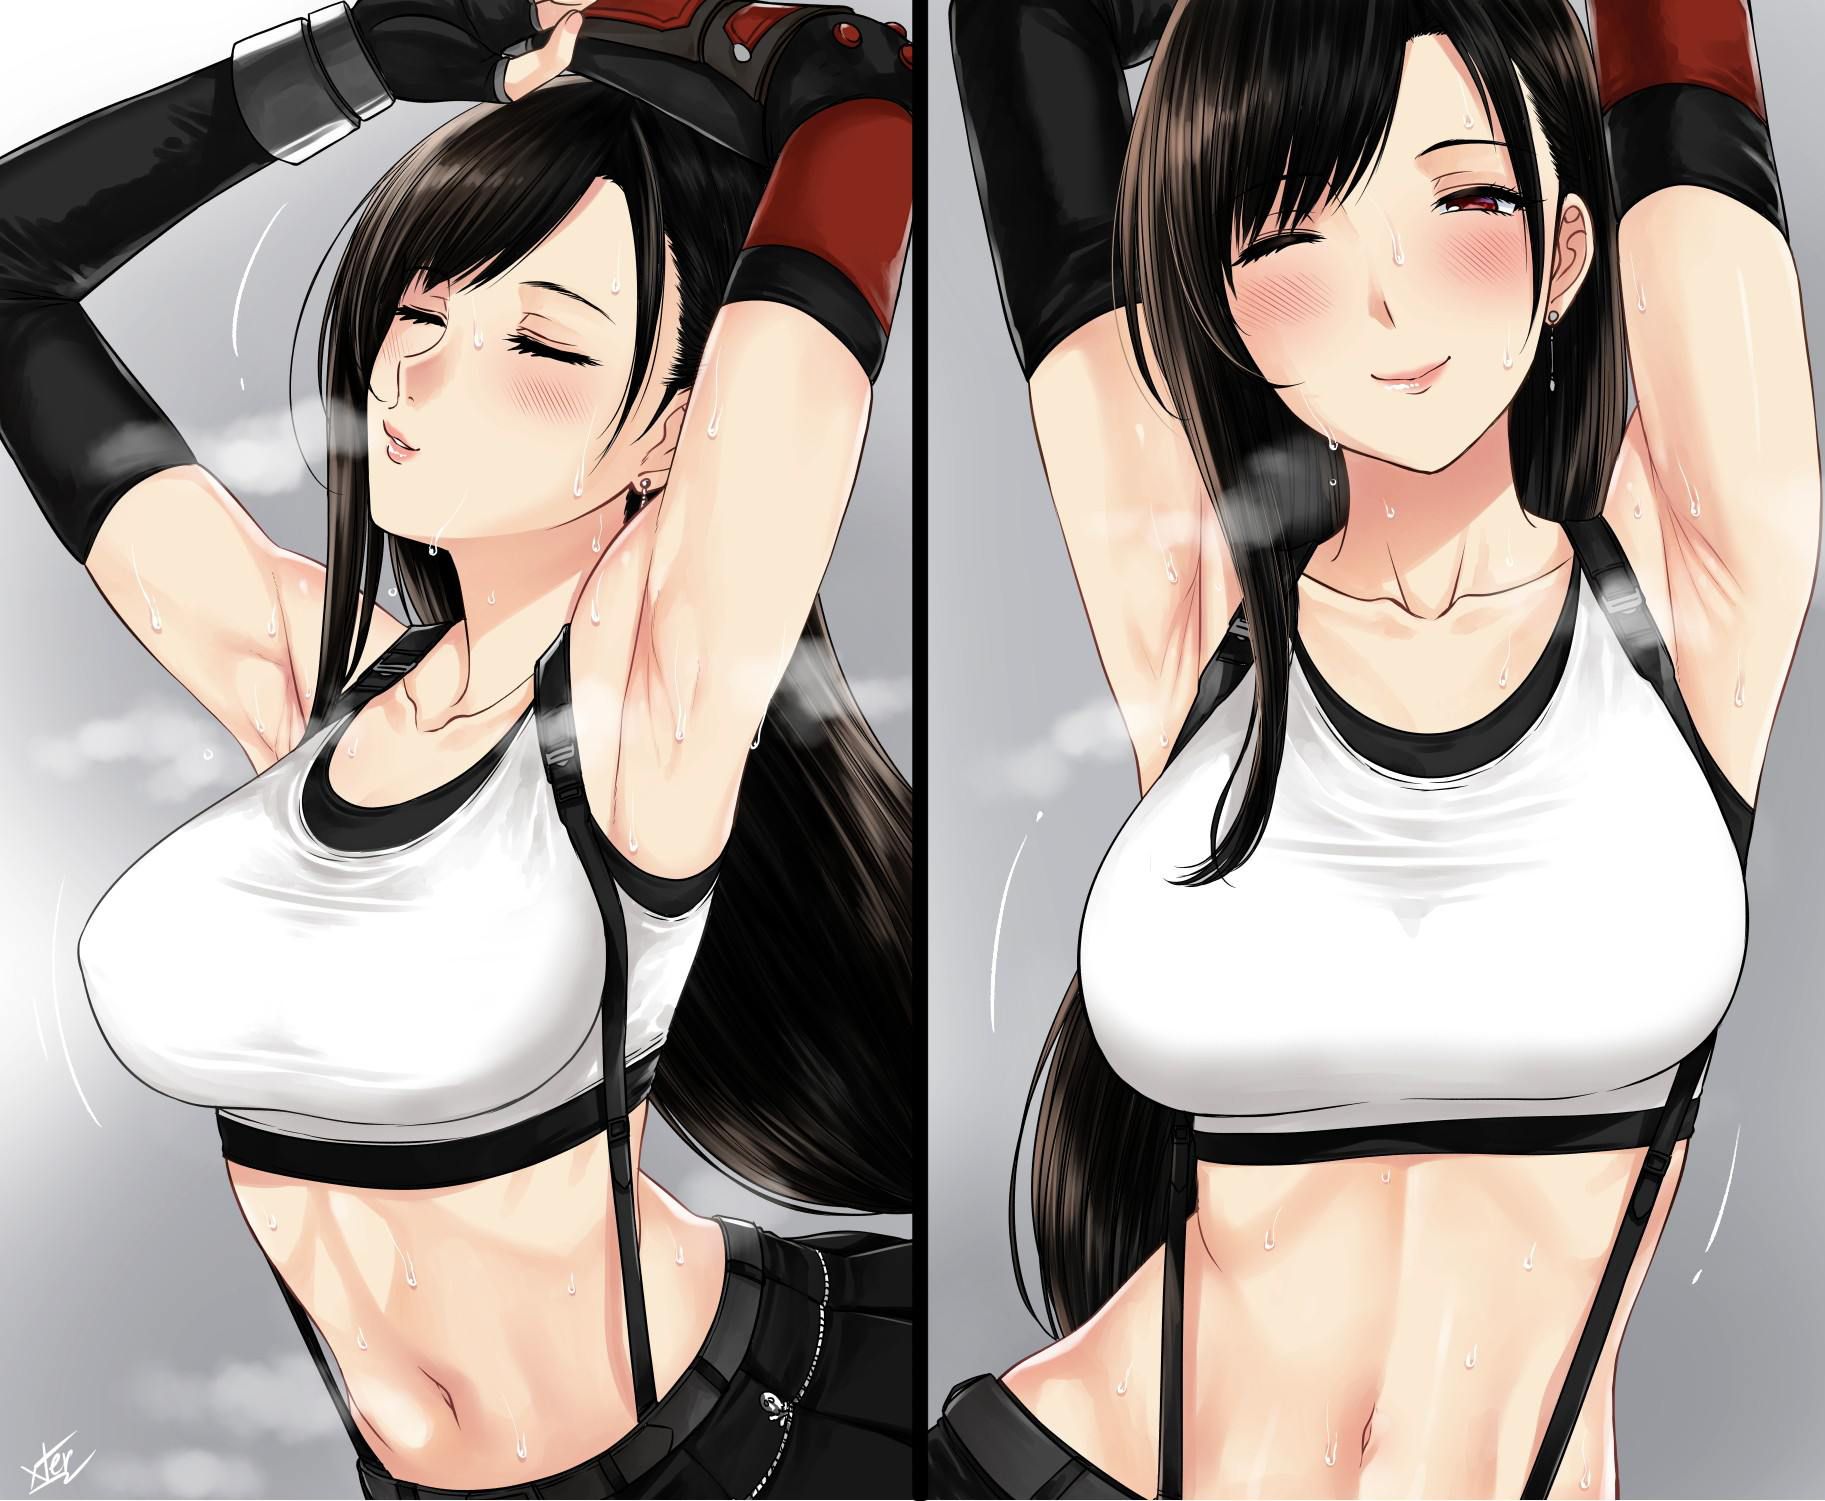 [Final Fantasy] about the second image of Tifa Lockhart too 18